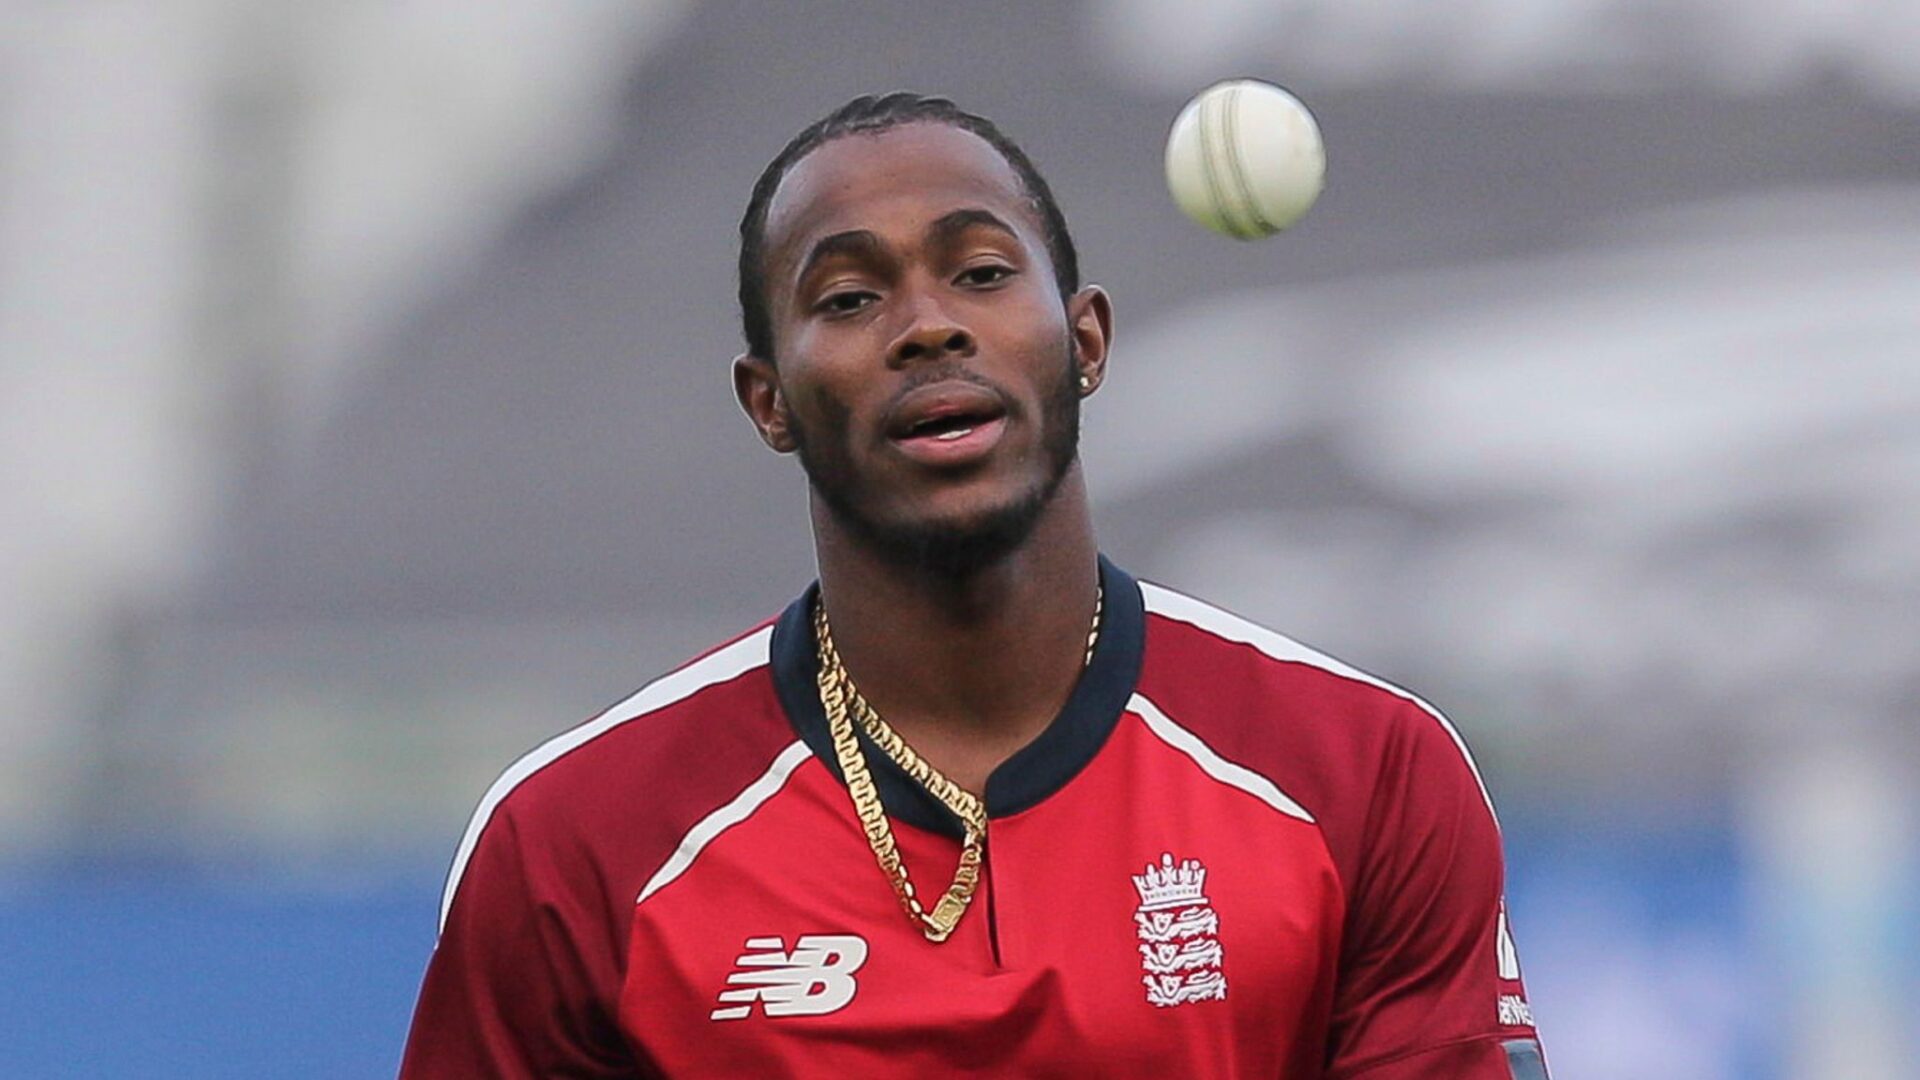 Jofra Archer | Jofra Archer not concerned about spending time inside  bio-secure bubble - Telegraph India